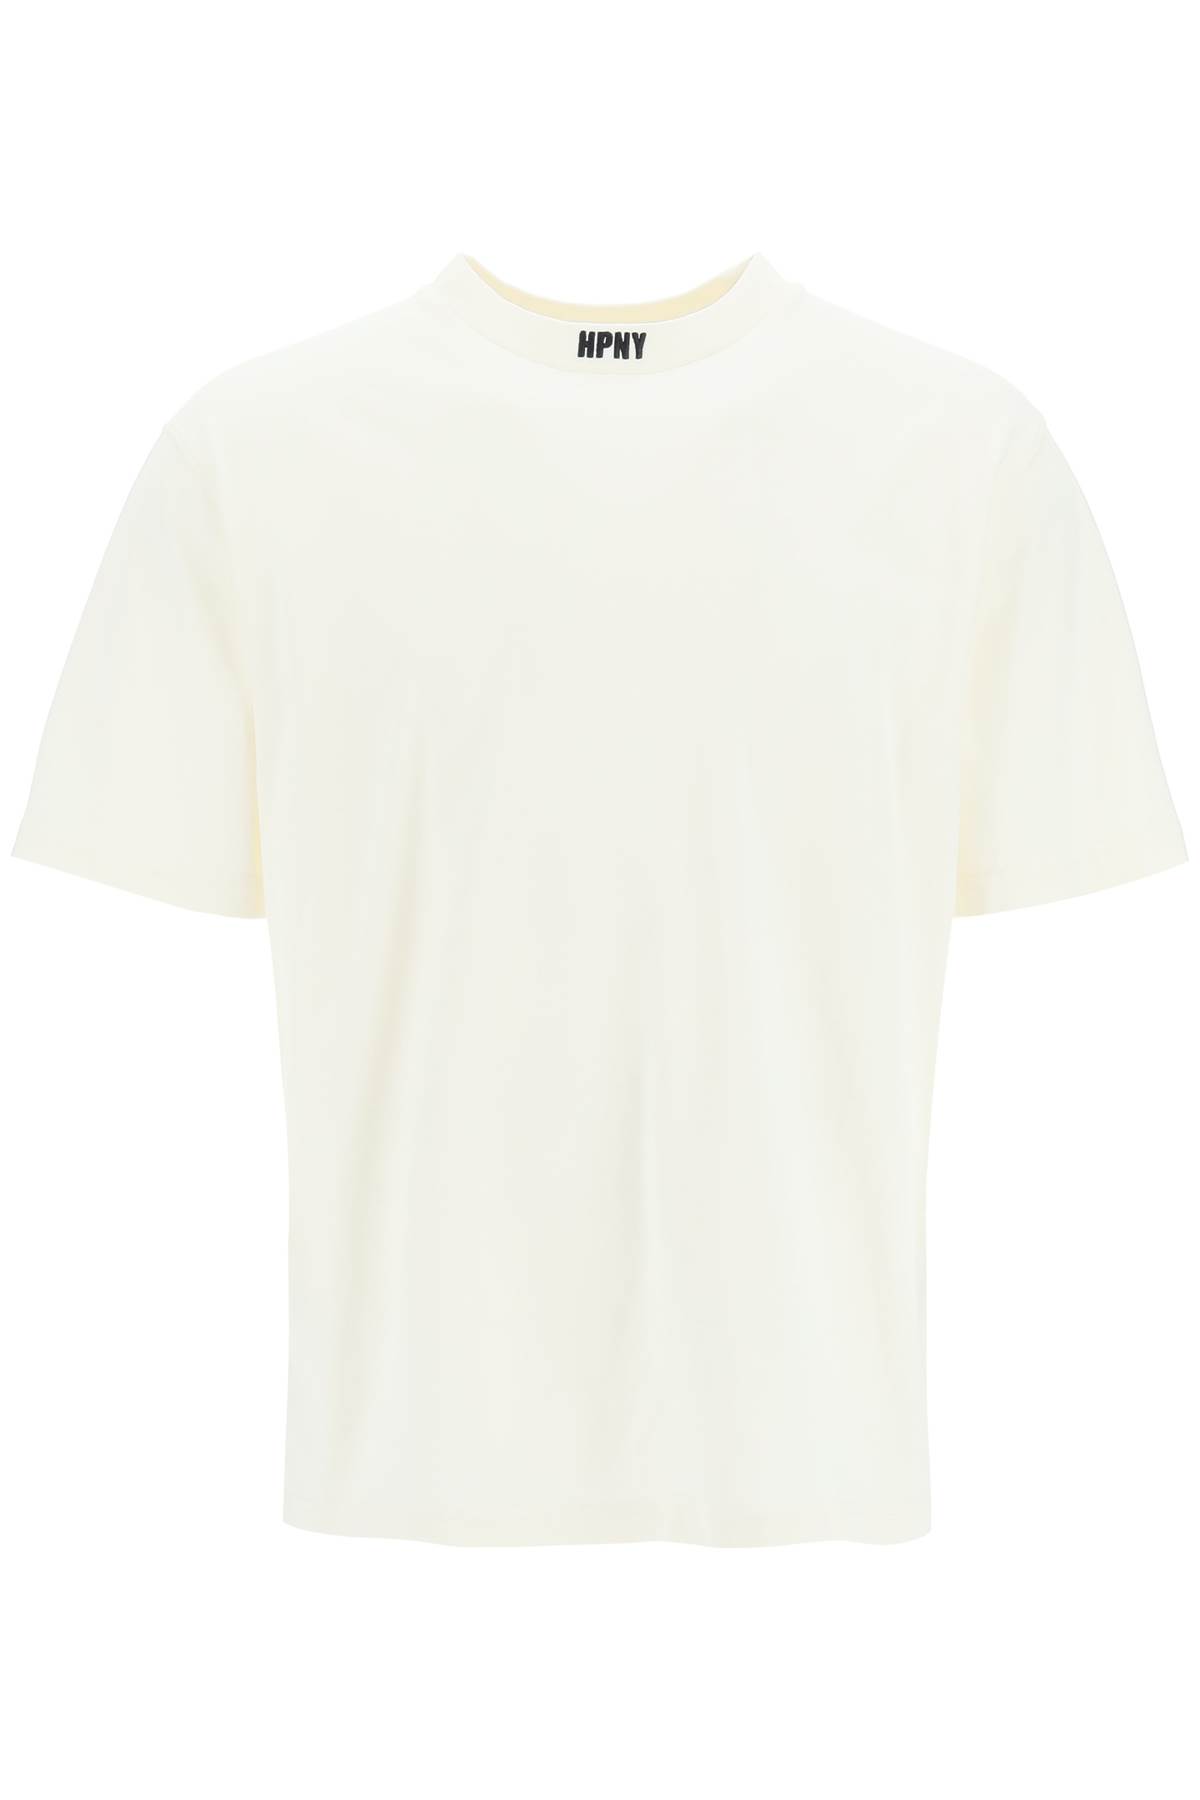 Heron Preston Hpny Embroidered T-shirt In White